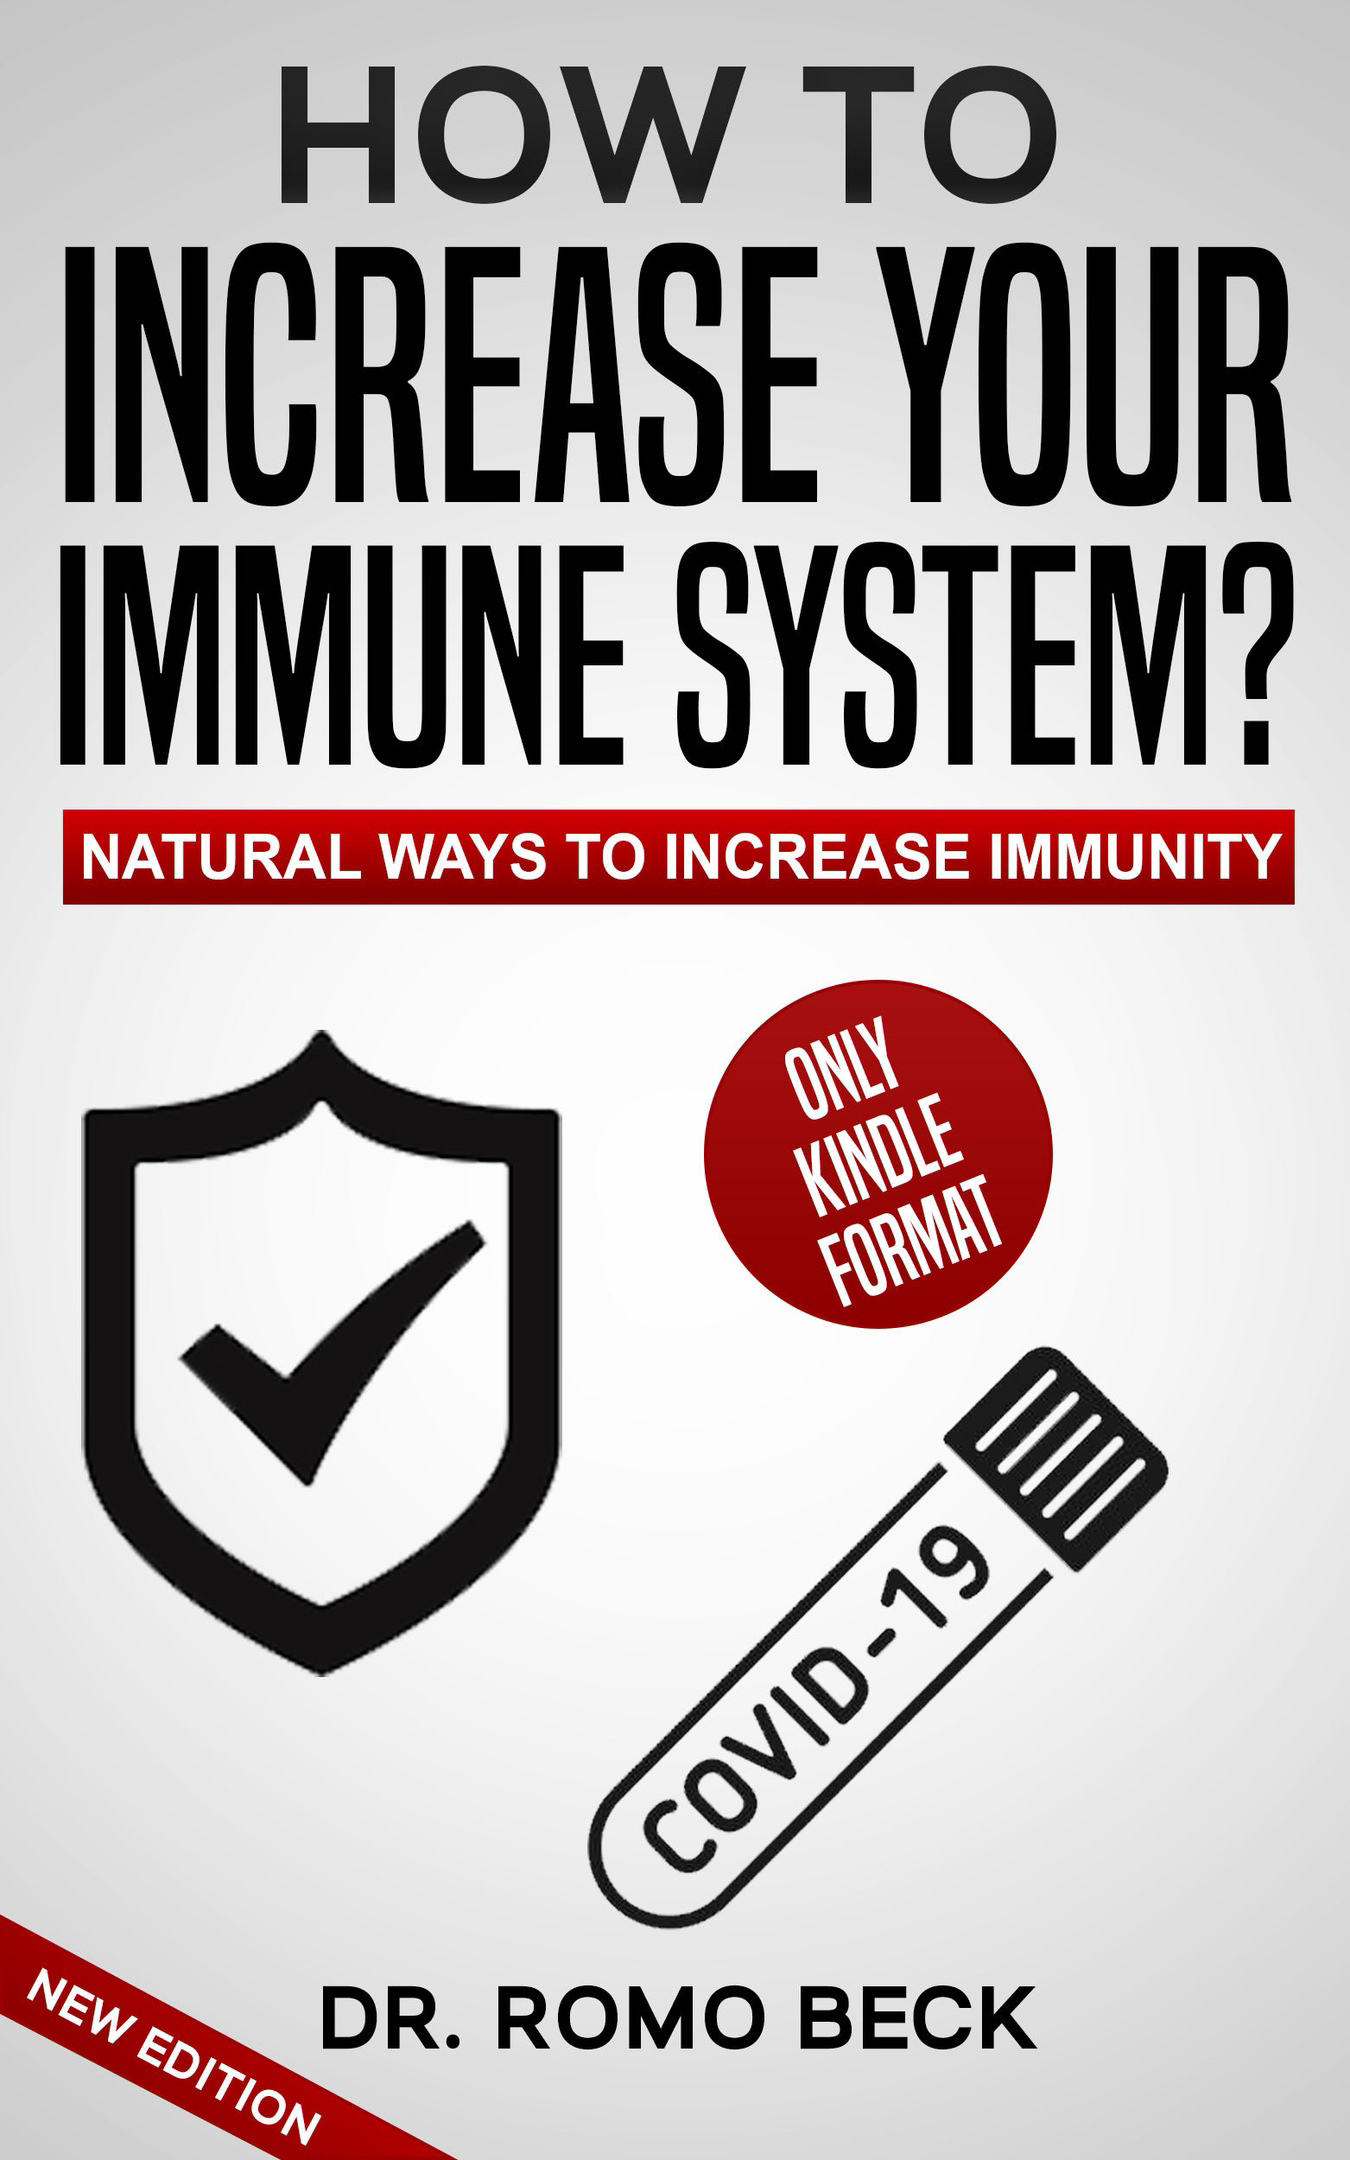 FREE: How to Increase Your Immune System? Natural Ways to Boost Immunity by Dr. Romo Beck